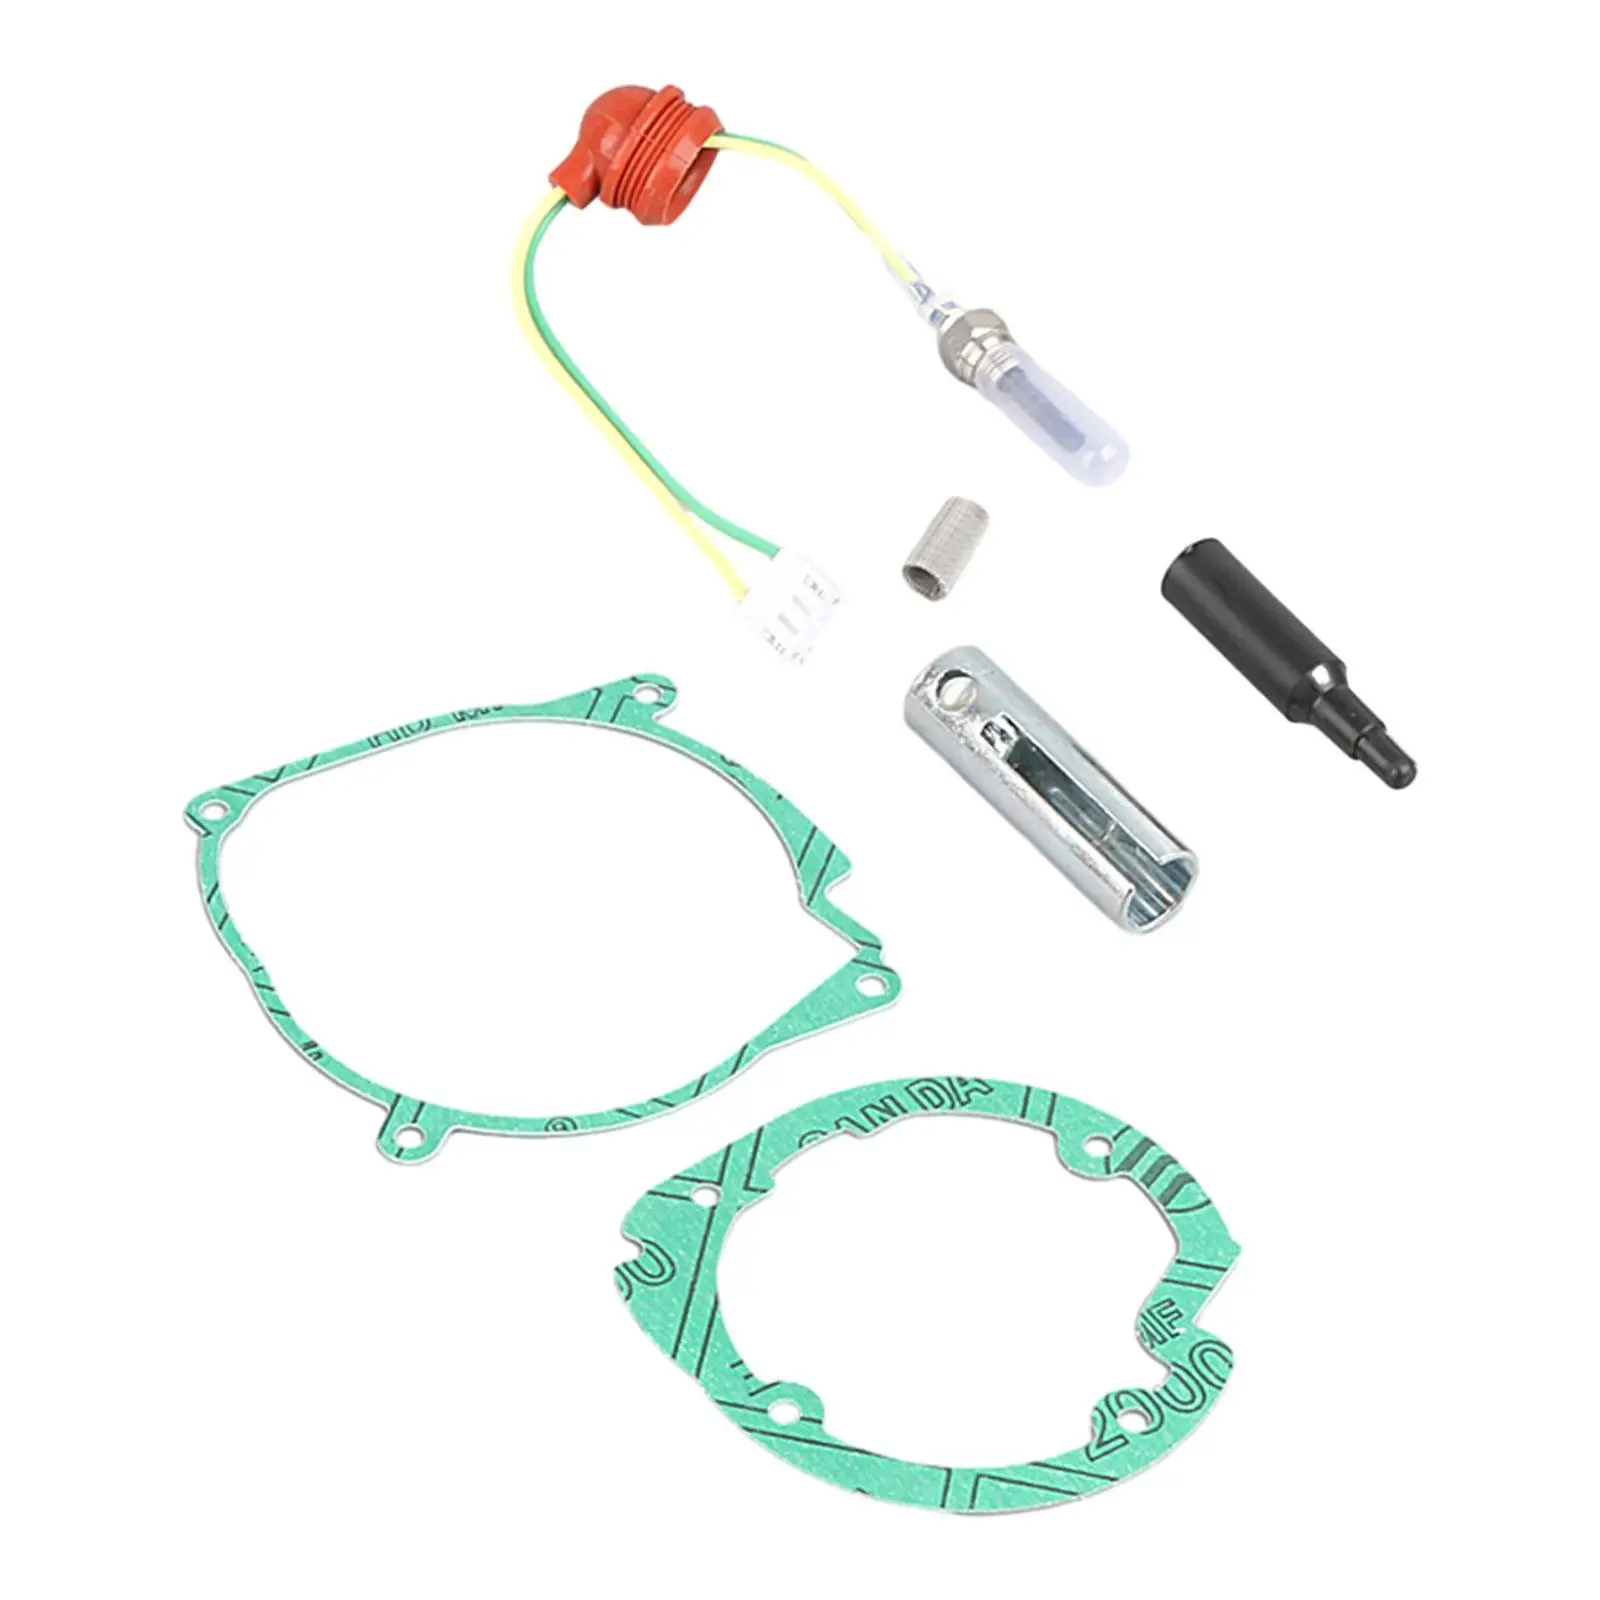 12V Glow Plug Repair Set 5kW Gaskets Replacement Accessories Easy Installation Parking Heater Maintenance Set Professional